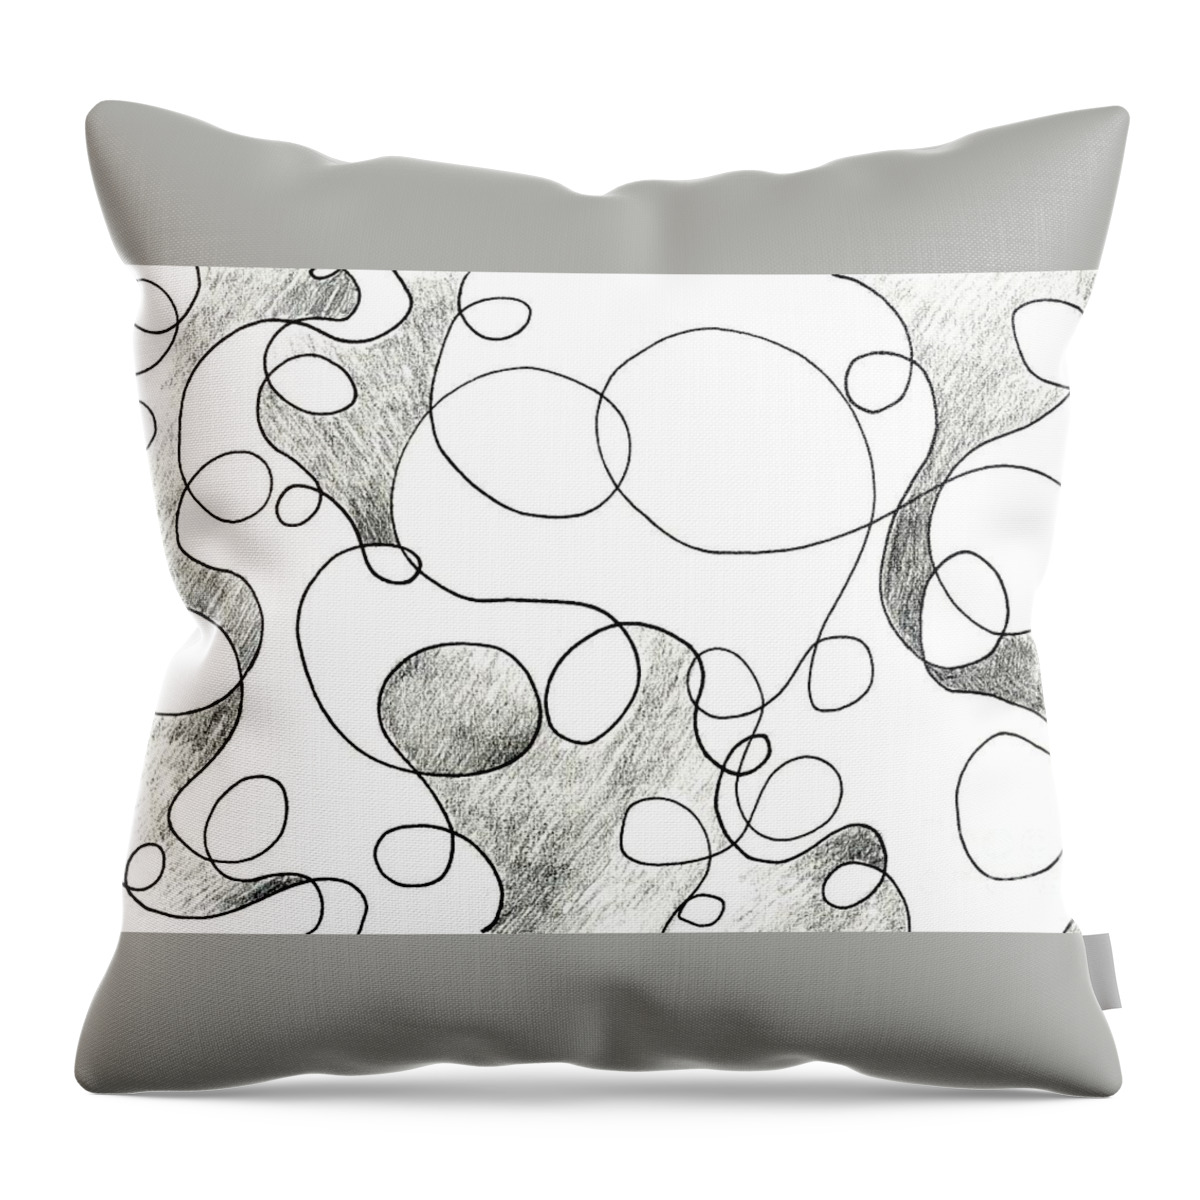 Dance Throw Pillow featuring the drawing The Dance by Helena Tiainen